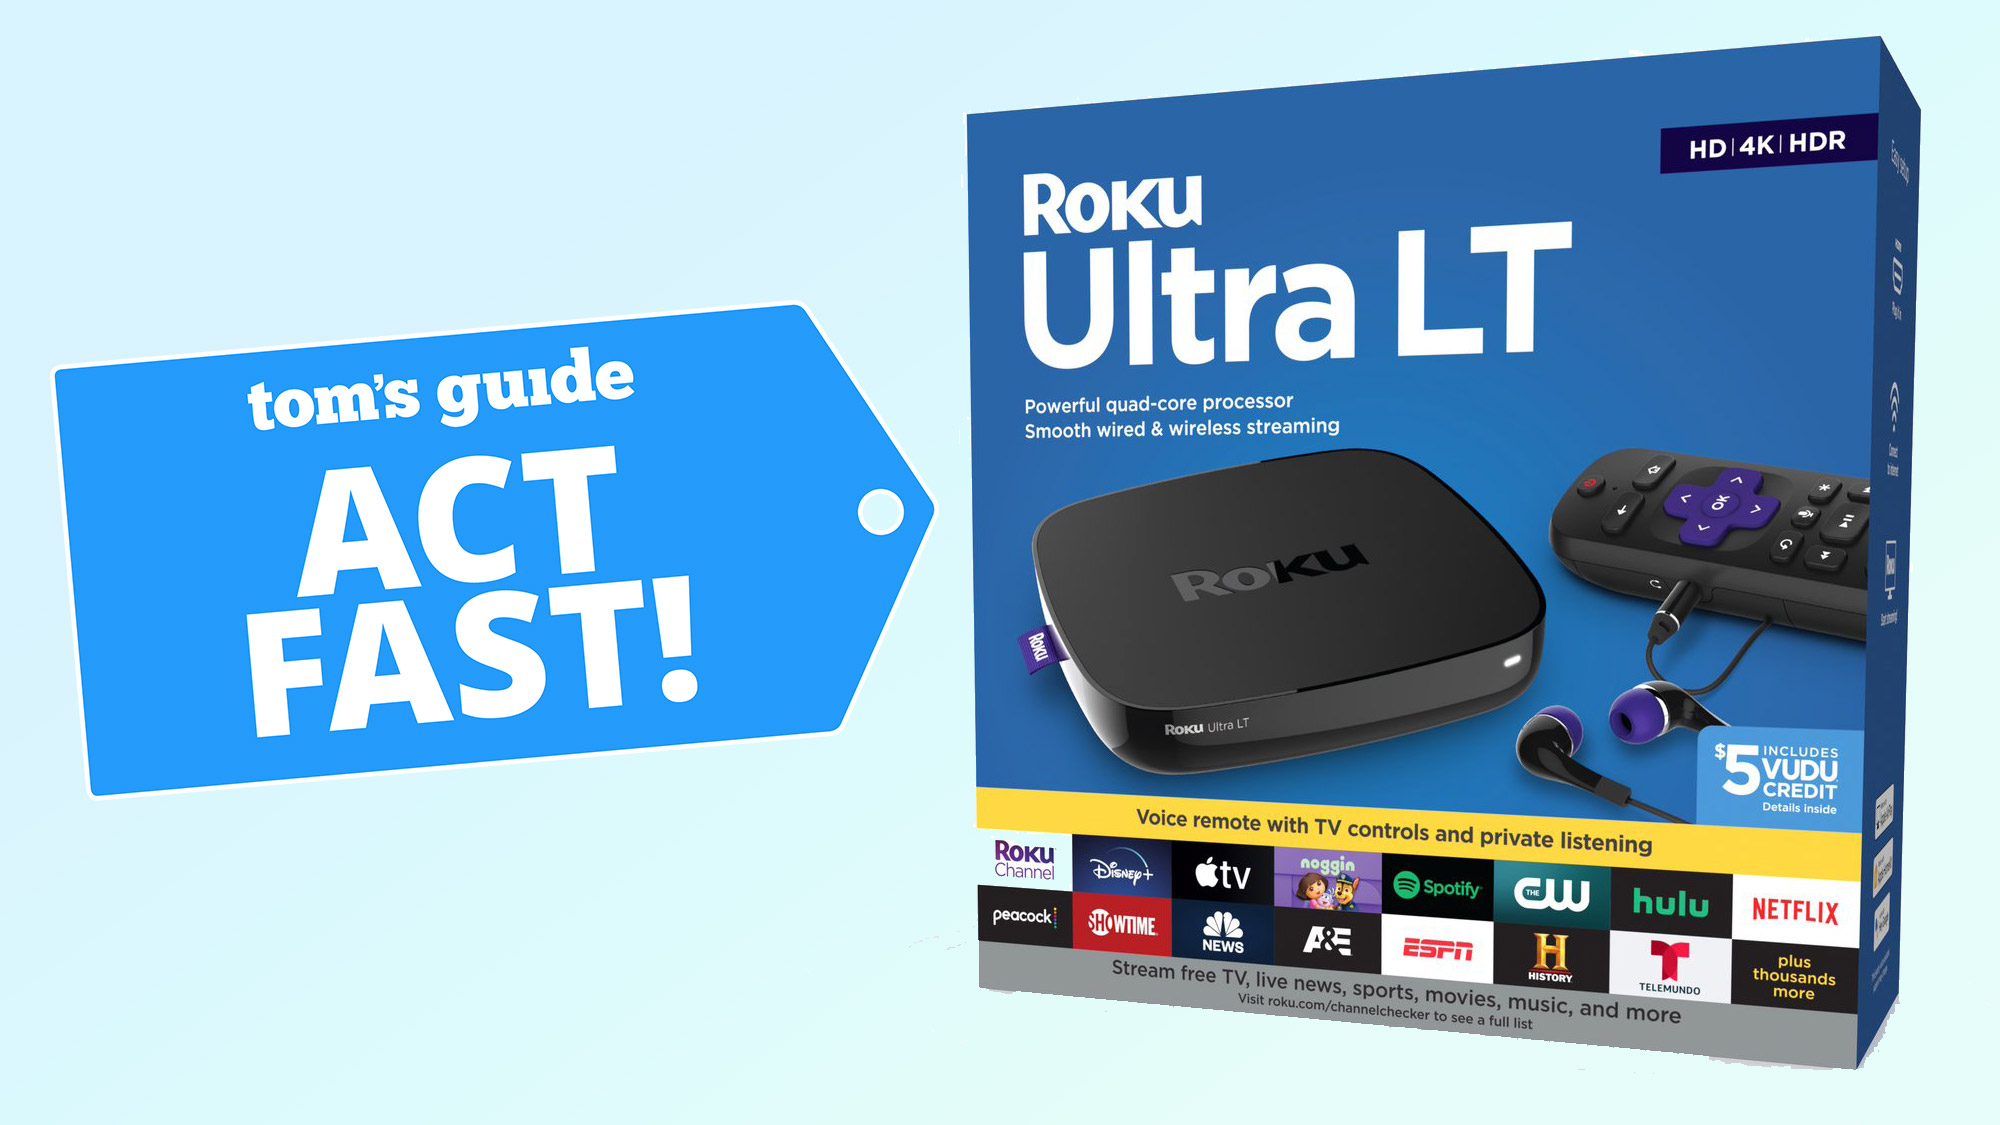 Black Friday header image featuring product show of the Roku Ultra LT streaming box.